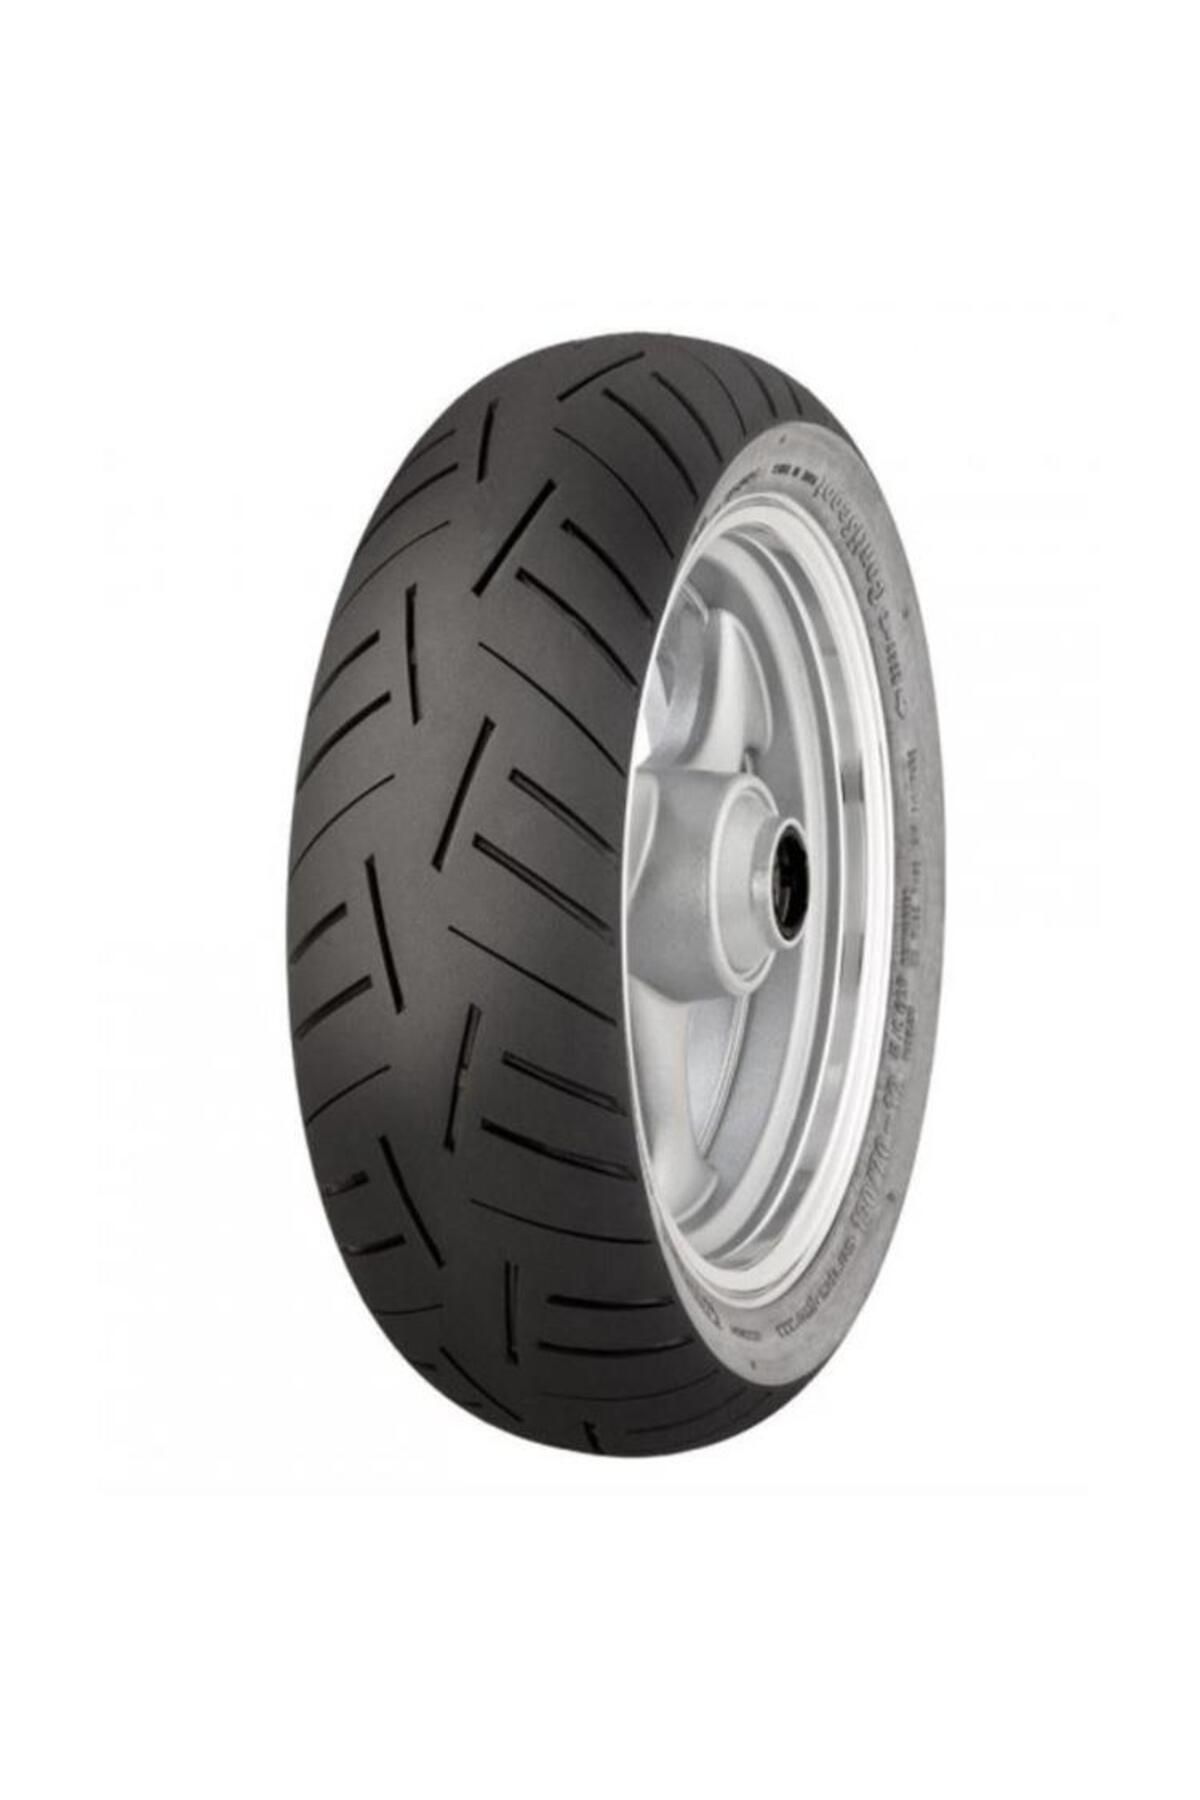 Continental Contınental 140/70-14 M/c 68s Reinf Tl Contiscoot Rear